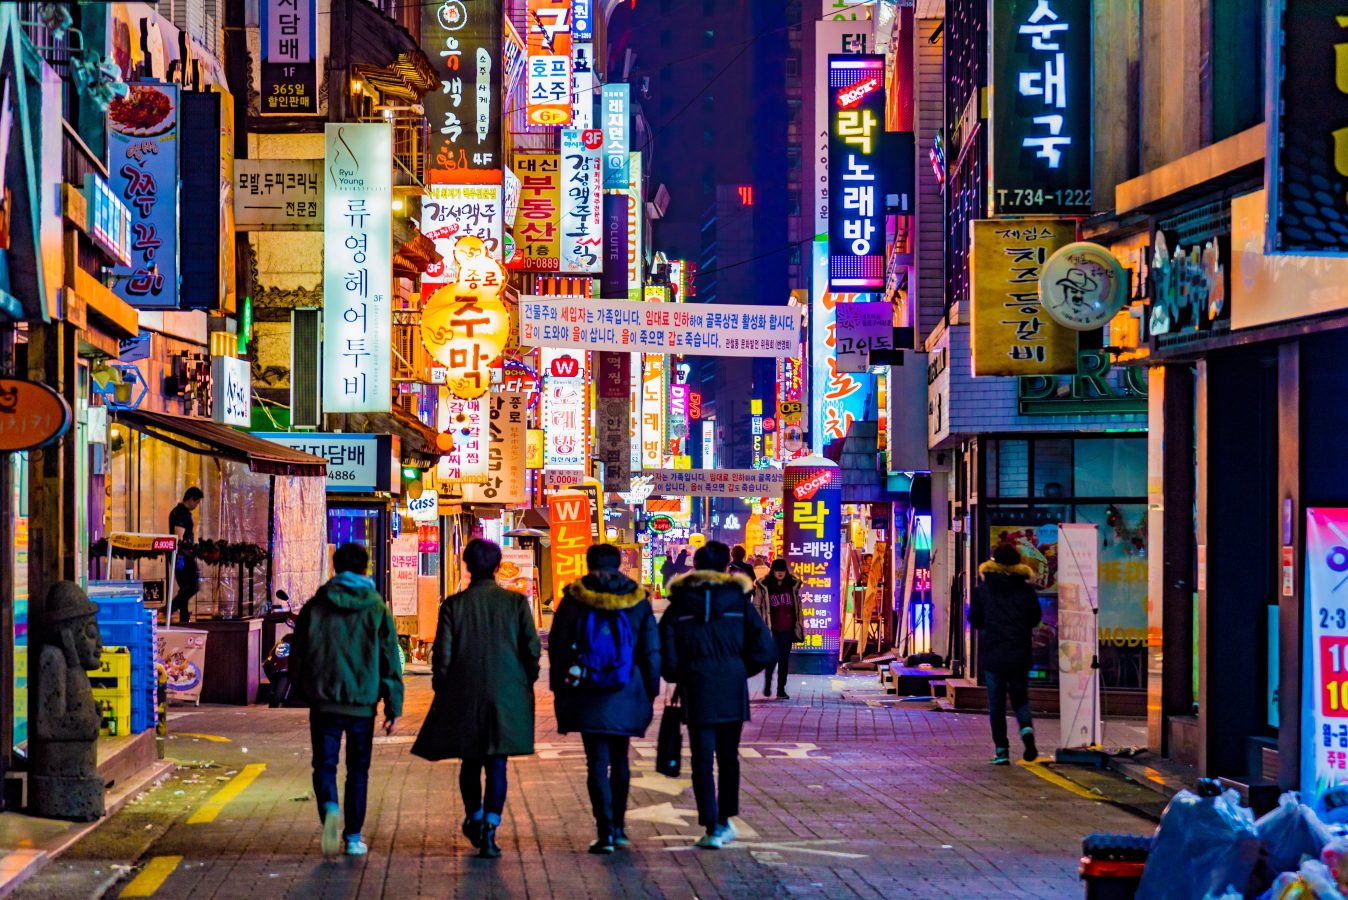 A group of friends walks under the neon lights and signs on a shopping street in Seoul, South Korea.